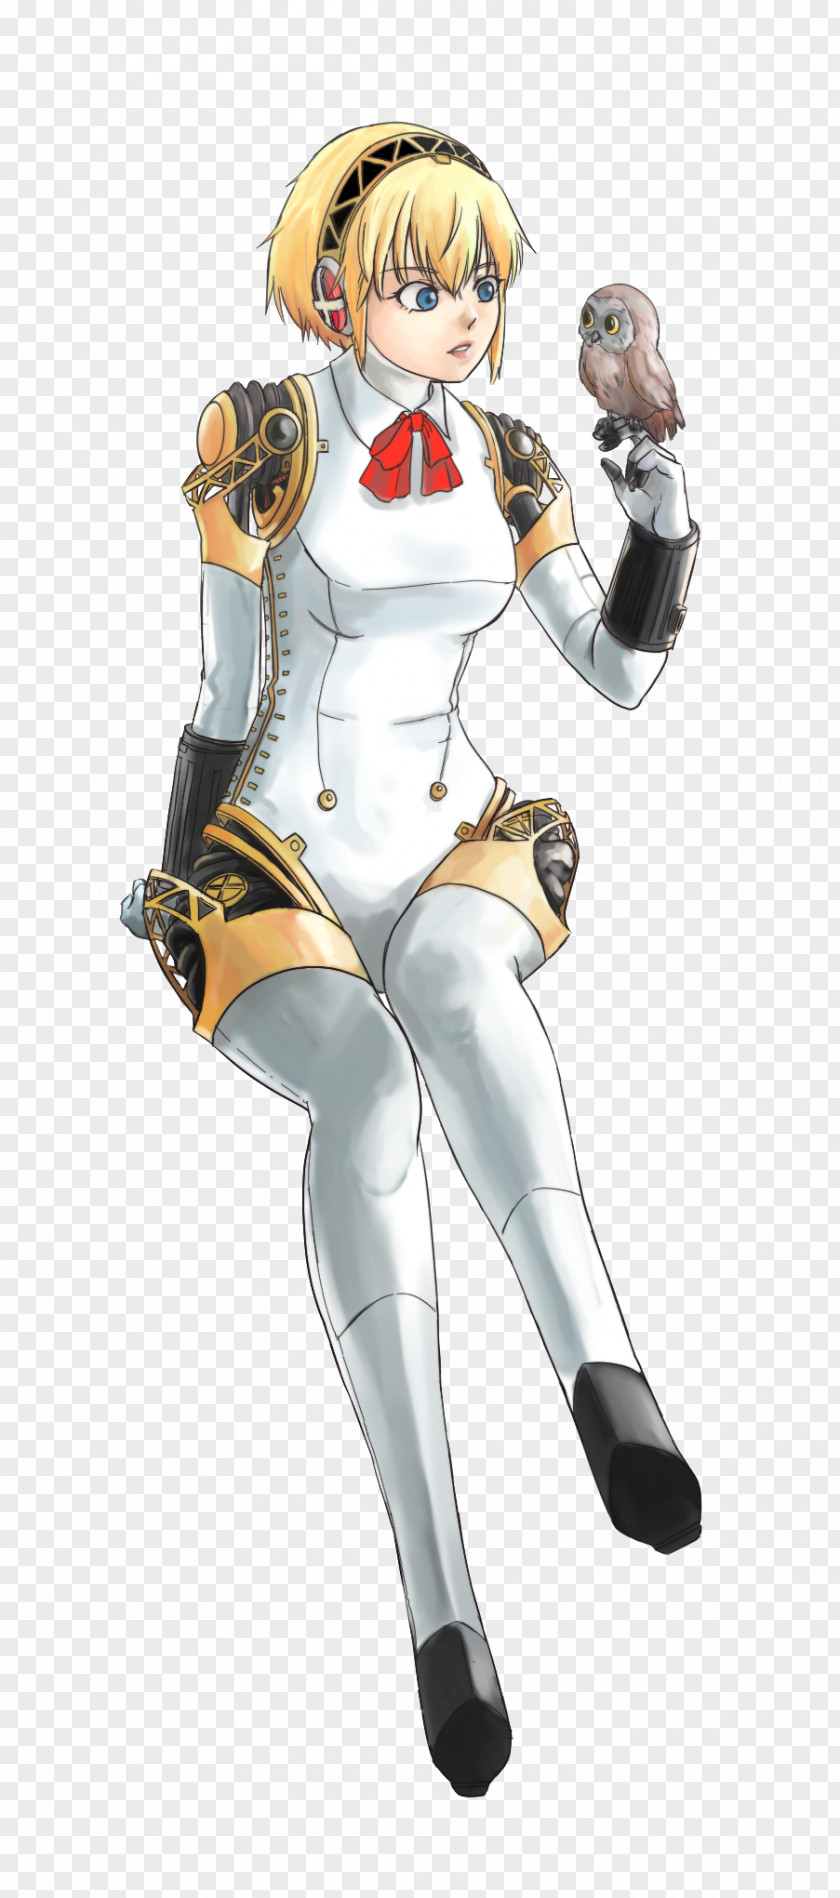 Costume Design Figurine Anime PNG design Anime, clipart PNG